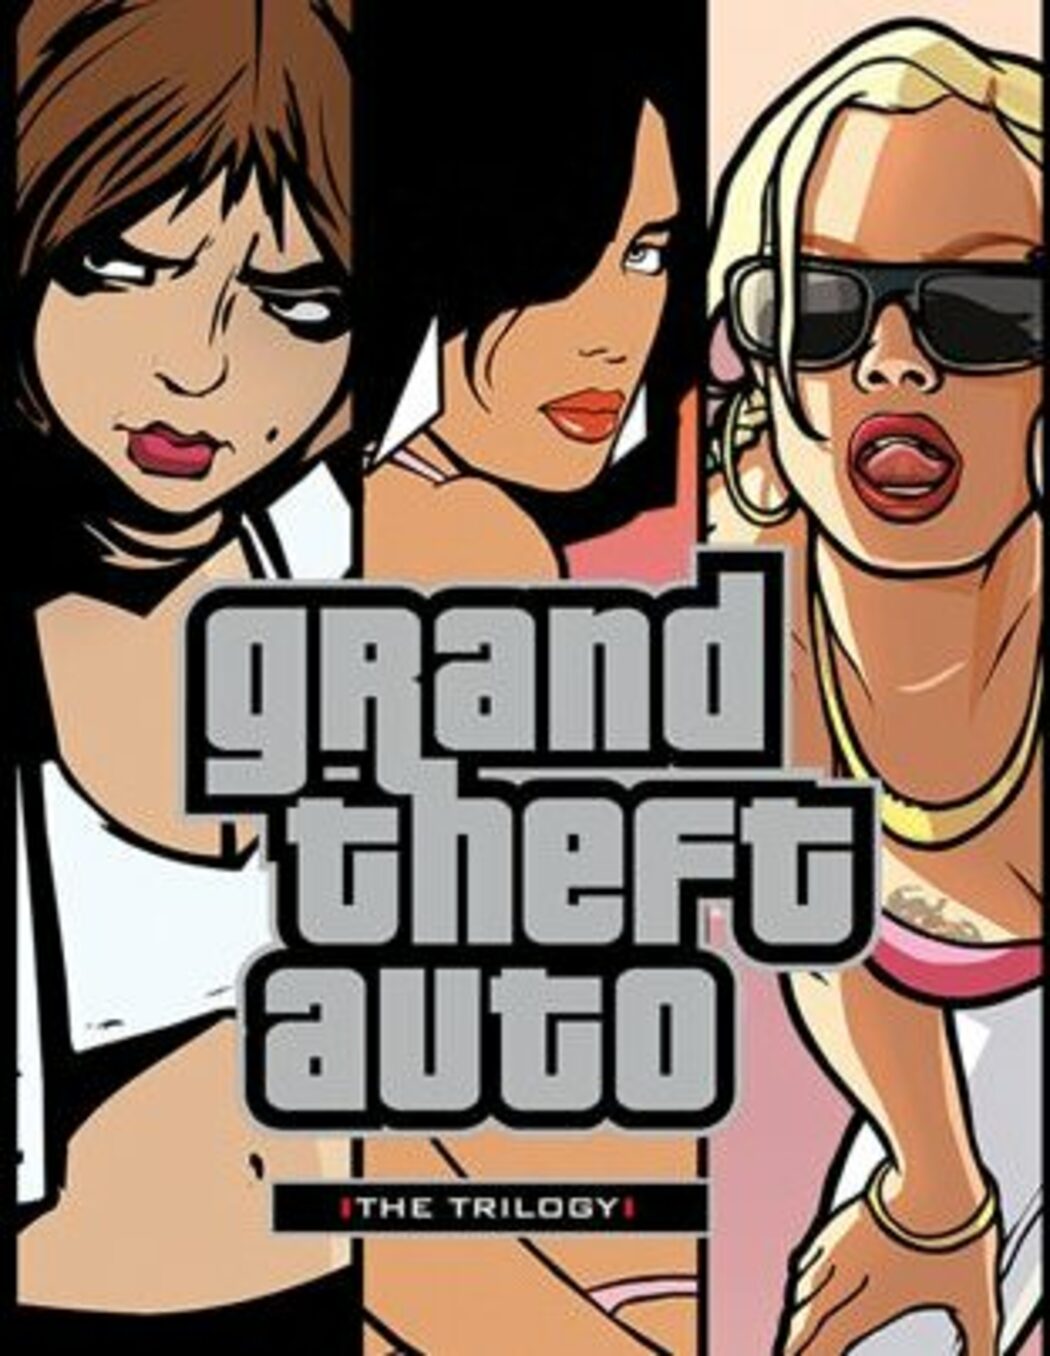 Grand Theft Auto: The Trilogy Steam key, Buy cheaper